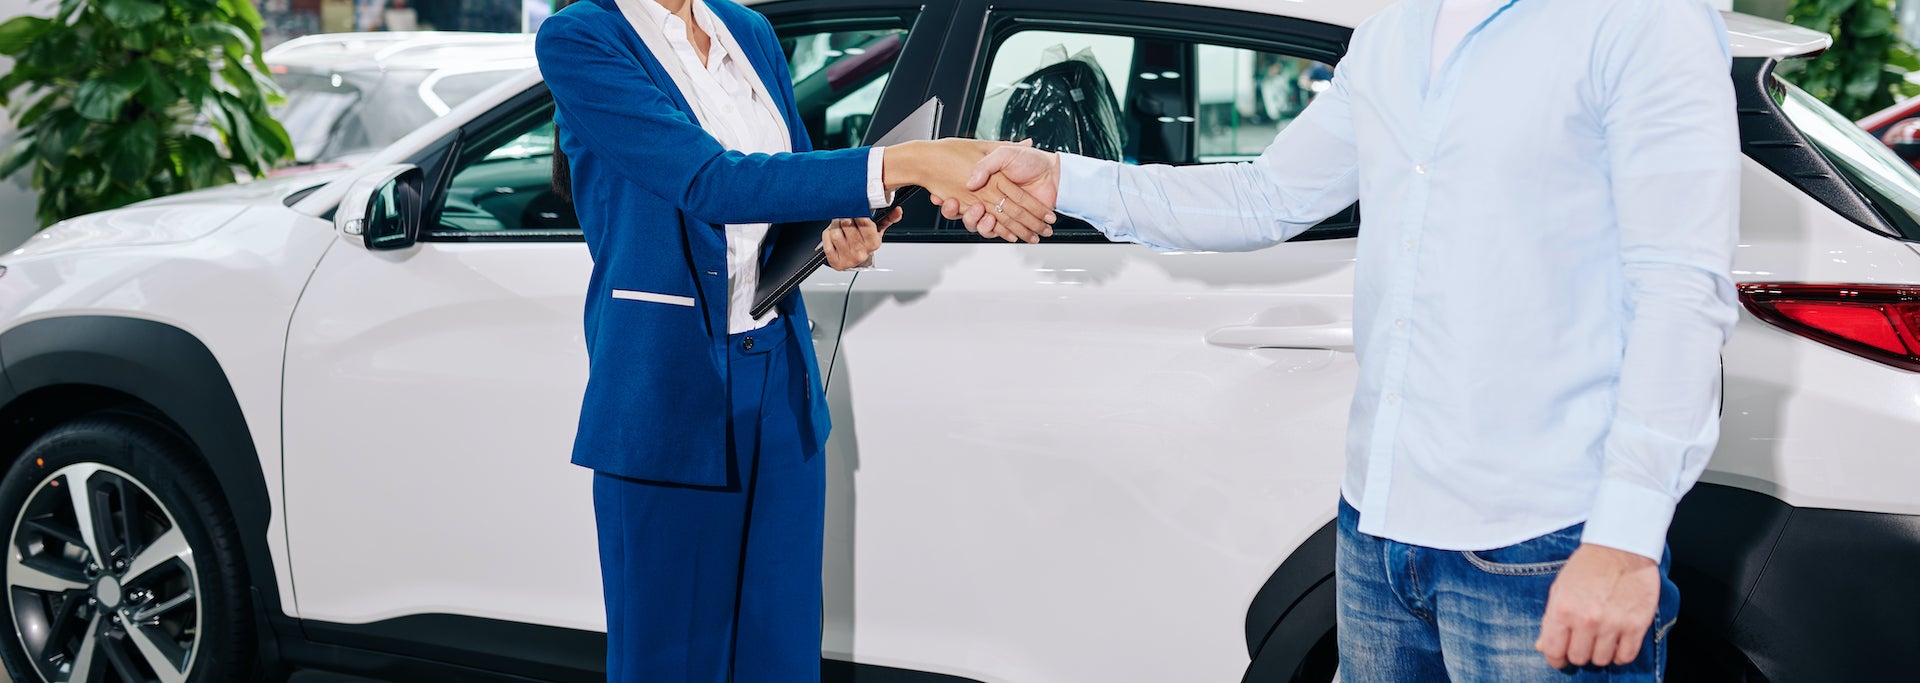 Documents to bring when purchasing a car at Bennett Toyota in Allentown | Customer making a deal with Toyota finance advisor